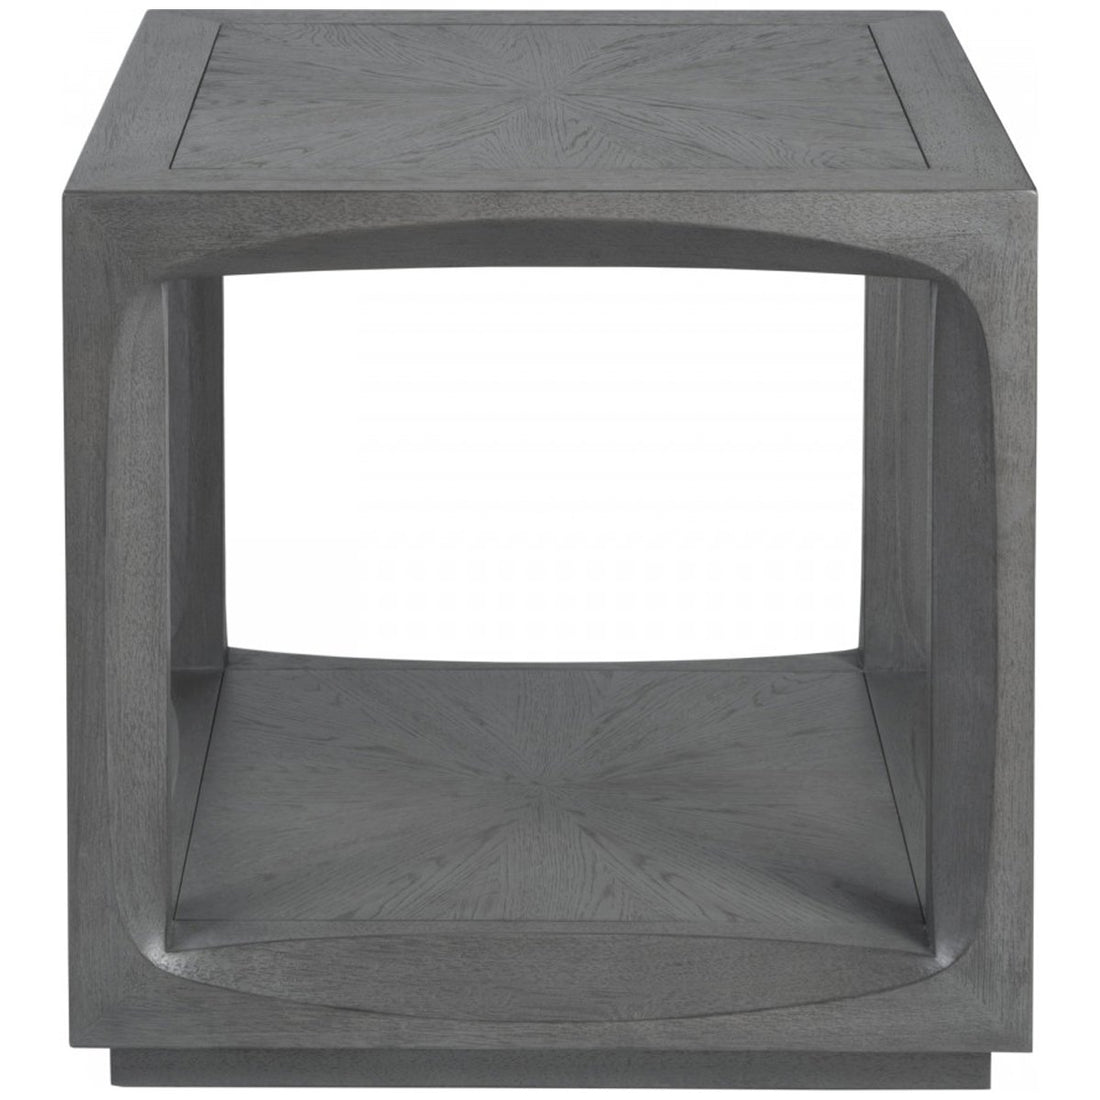 Artistica Home Appellation Square End Table 2200-957